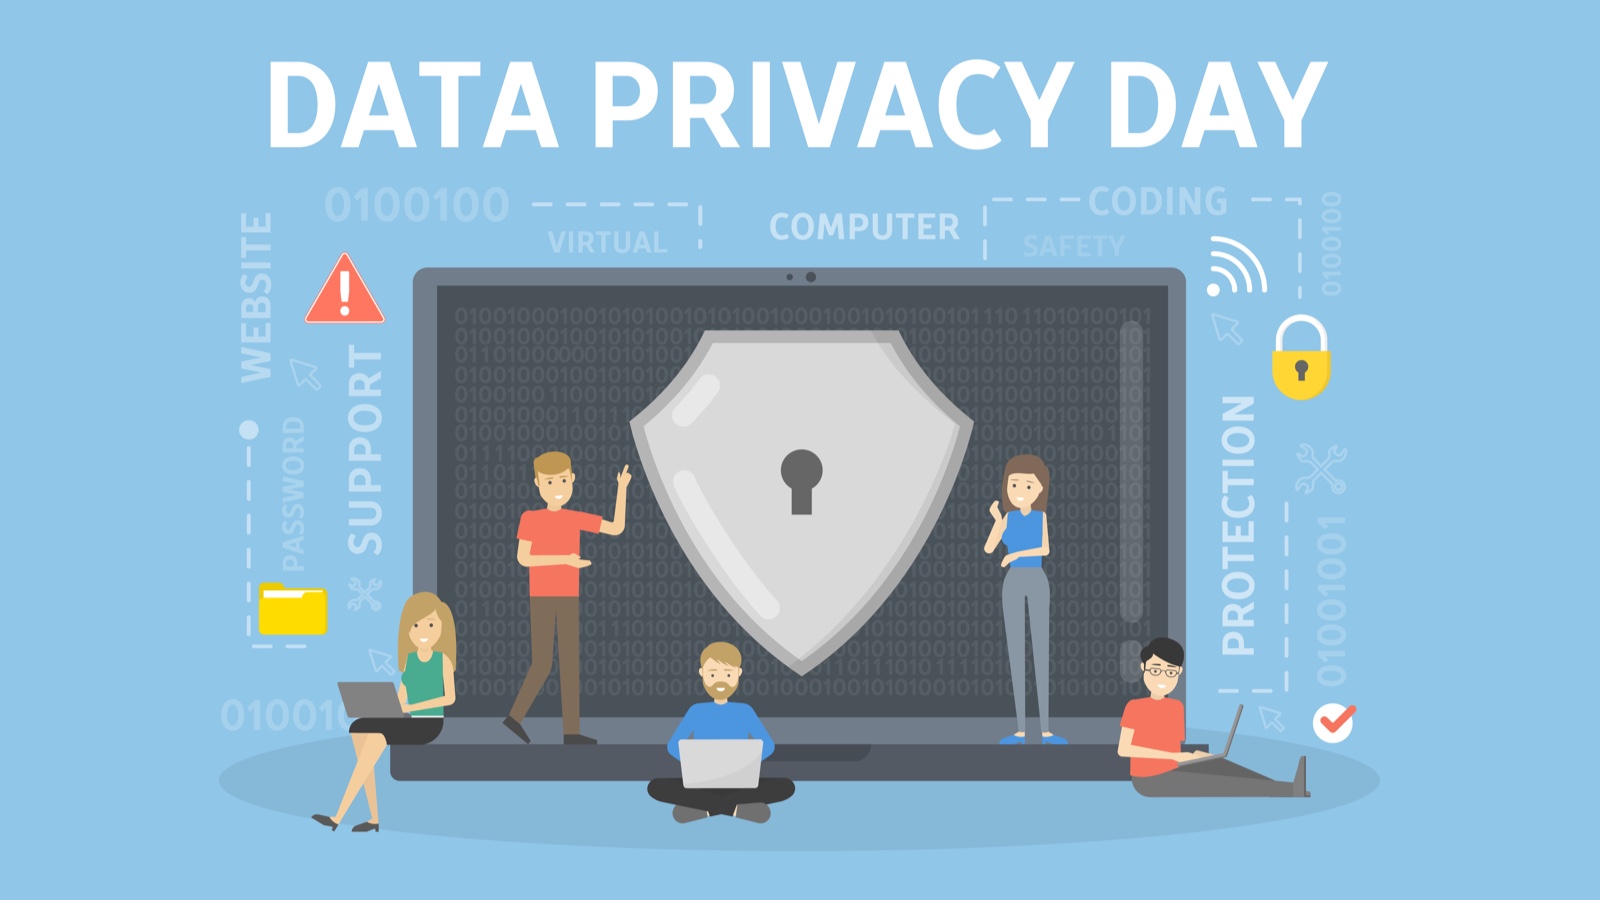 Data Privacy Day 2021 Outreach: Six Words about Privacy